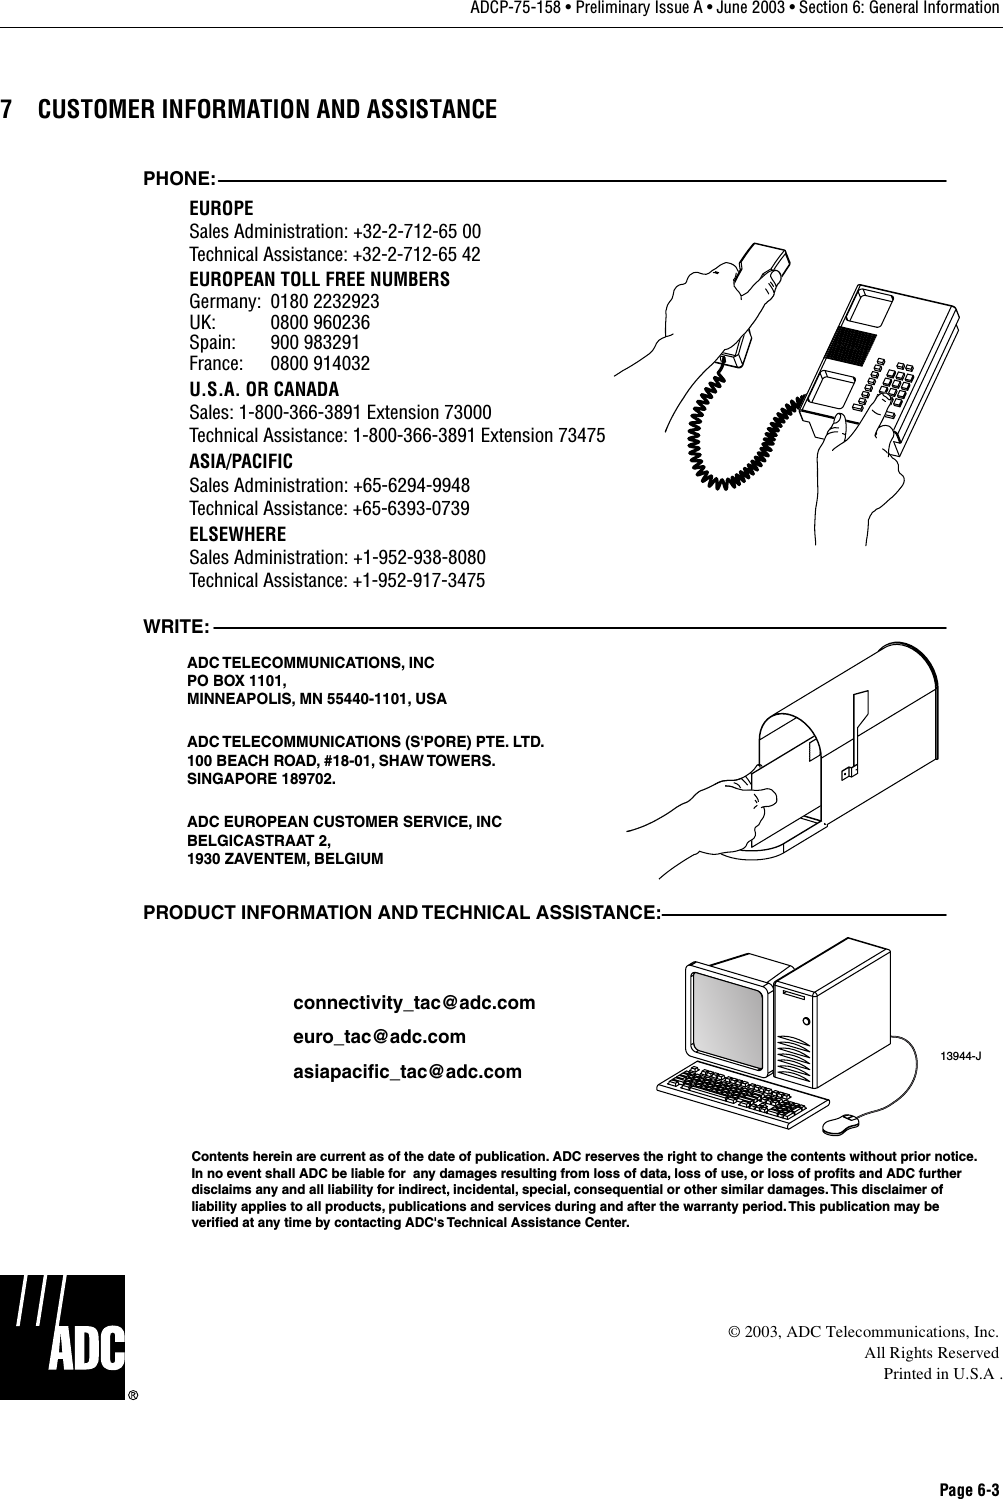 Page 6-3ADCP-75-158 • Preliminary Issue A • June 2003 • Section 6: General Information7 CUSTOMER INFORMATION AND ASSISTANCE© 2003, ADC Telecommunications, Inc.All Rights ReservedPrinted in U.S.A .13944-JWRITE:ADC TELECOMMUNICATIONS, INCPO BOX 1101,MINNEAPOLIS, MN 55440-1101, USAADC TELECOMMUNICATIONS (S&apos;PORE) PTE. LTD.100 BEACH ROAD, #18-01, SHAW TOWERS.SINGAPORE 189702.ADC EUROPEAN CUSTOMER SERVICE, INCBELGICASTRAAT 2,1930 ZAVENTEM, BELGIUMPHONE:EUROPESales Administration: +32-2-712-65 00Technical Assistance: +32-2-712-65 42EUROPEAN TOLL FREE NUMBERSUK: 0800 960236Spain: 900 983291France: 0800 914032Germany: 0180 2232923U.S.A. OR CANADASales: 1-800-366-3891 Extension 73000Technical Assistance: 1-800-366-3891 Extension 73475ASIA/PACIFICSales Administration: +65-6294-9948Technical Assistance: +65-6393-0739ELSEWHERESales Administration: +1-952-938-8080Technical Assistance: +1-952-917-3475PRODUCT INFORMATION AND TECHNICAL ASSISTANCE:Contents herein are current as of the date of publication. ADC reserves the right to change the contents without prior notice.In no event shall ADC be liable for  any damages resulting from loss of data, loss of use, or loss of profits and ADC furtherdisclaims any and all liability for indirect, incidental, special, consequential or other similar damages. This disclaimer ofliability applies to all products, publications and services during and after the warranty period. This publication may beverified at any time by contacting ADC&apos;s Technical Assistance Center. euro_tac@adc.comasiapacific_tac@adc.comconnectivity_tac@adc.com